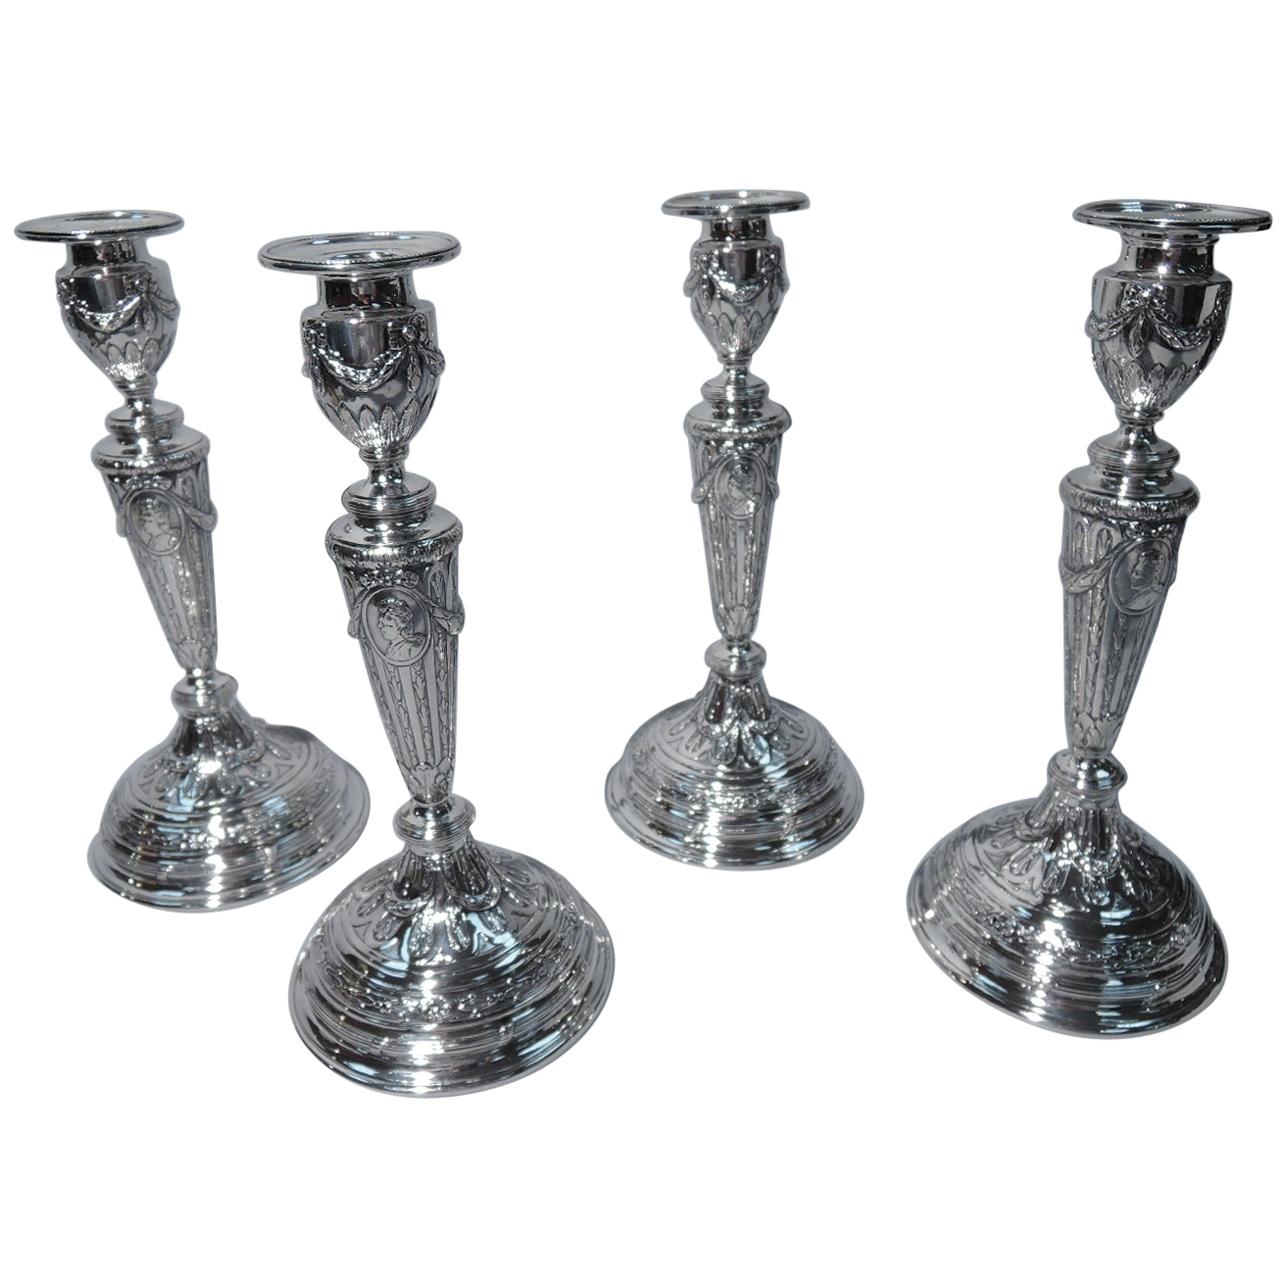 Set of 4 Rococo German Silver Candlesticks with Medallion Profile